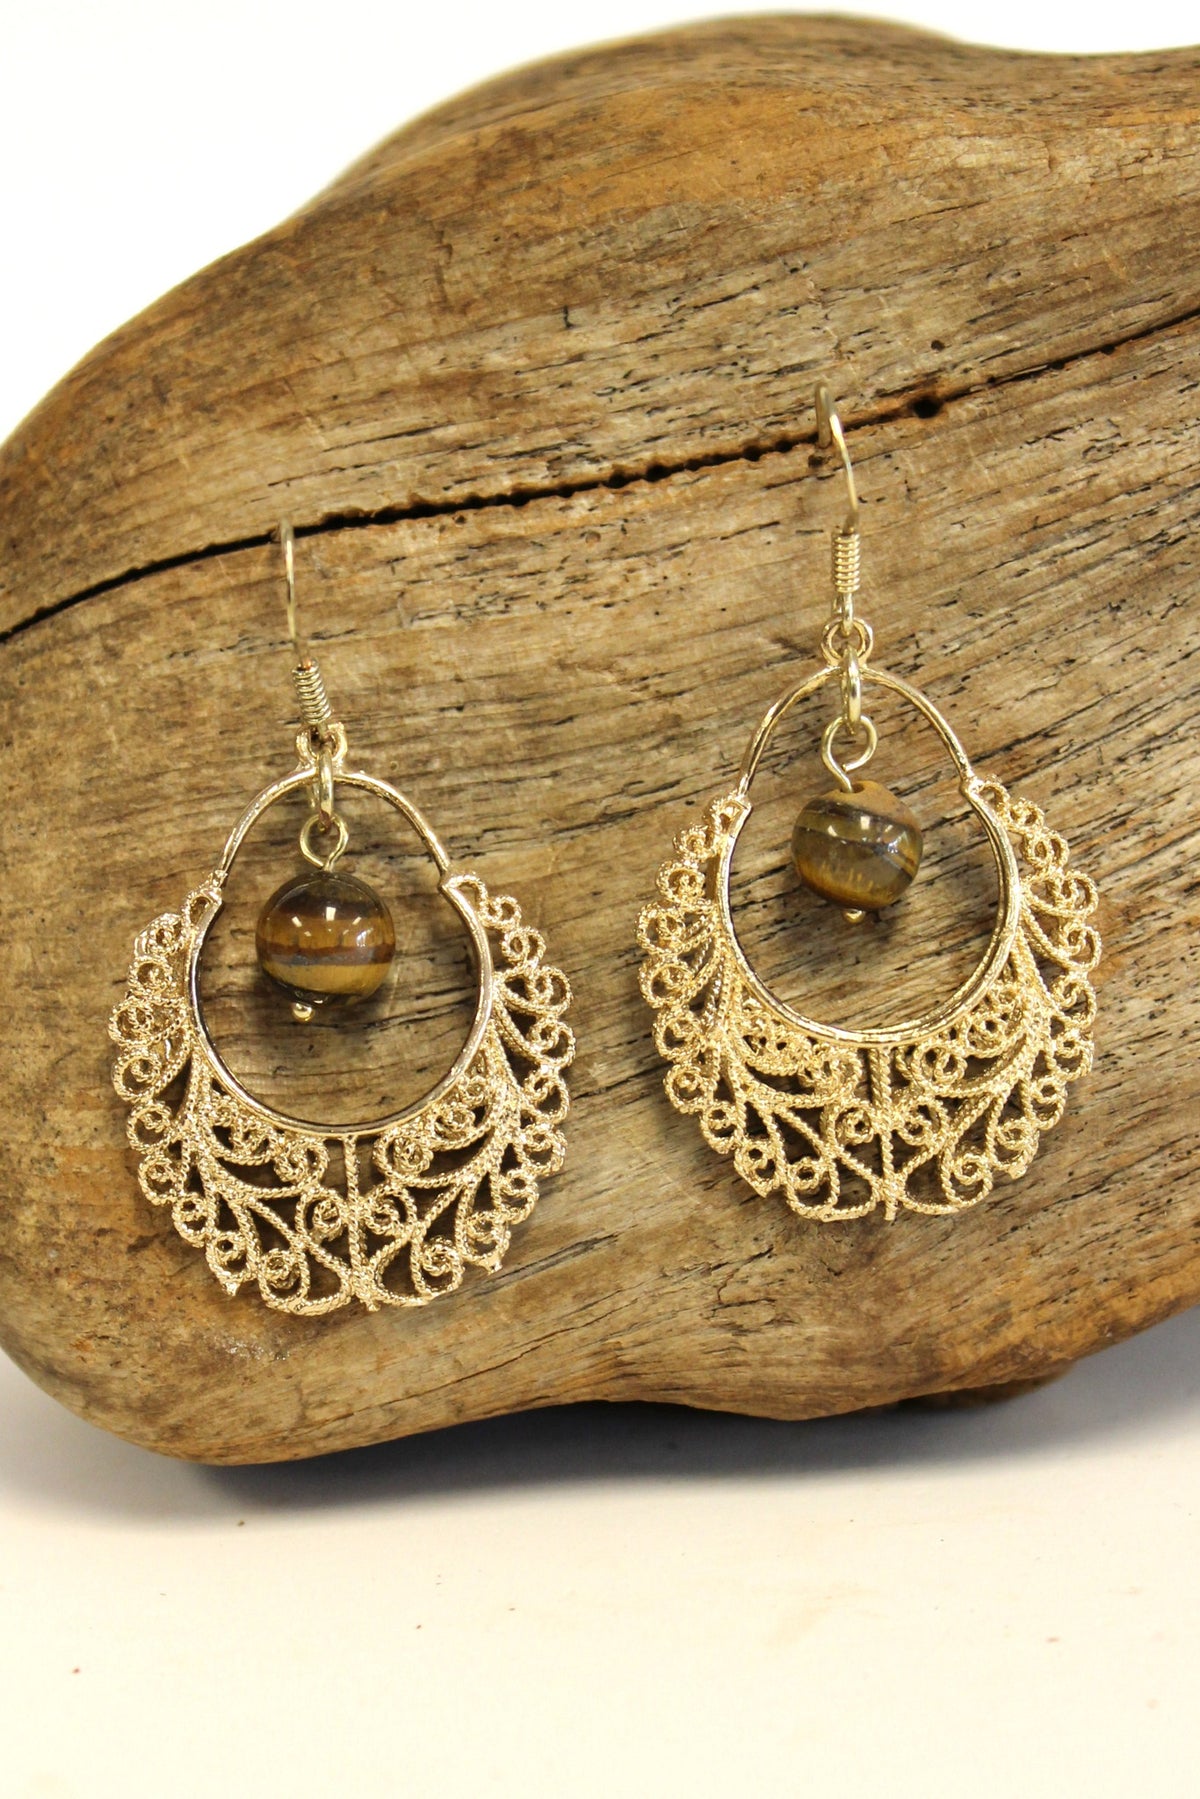 Filigree Earrings with Bead, Gold